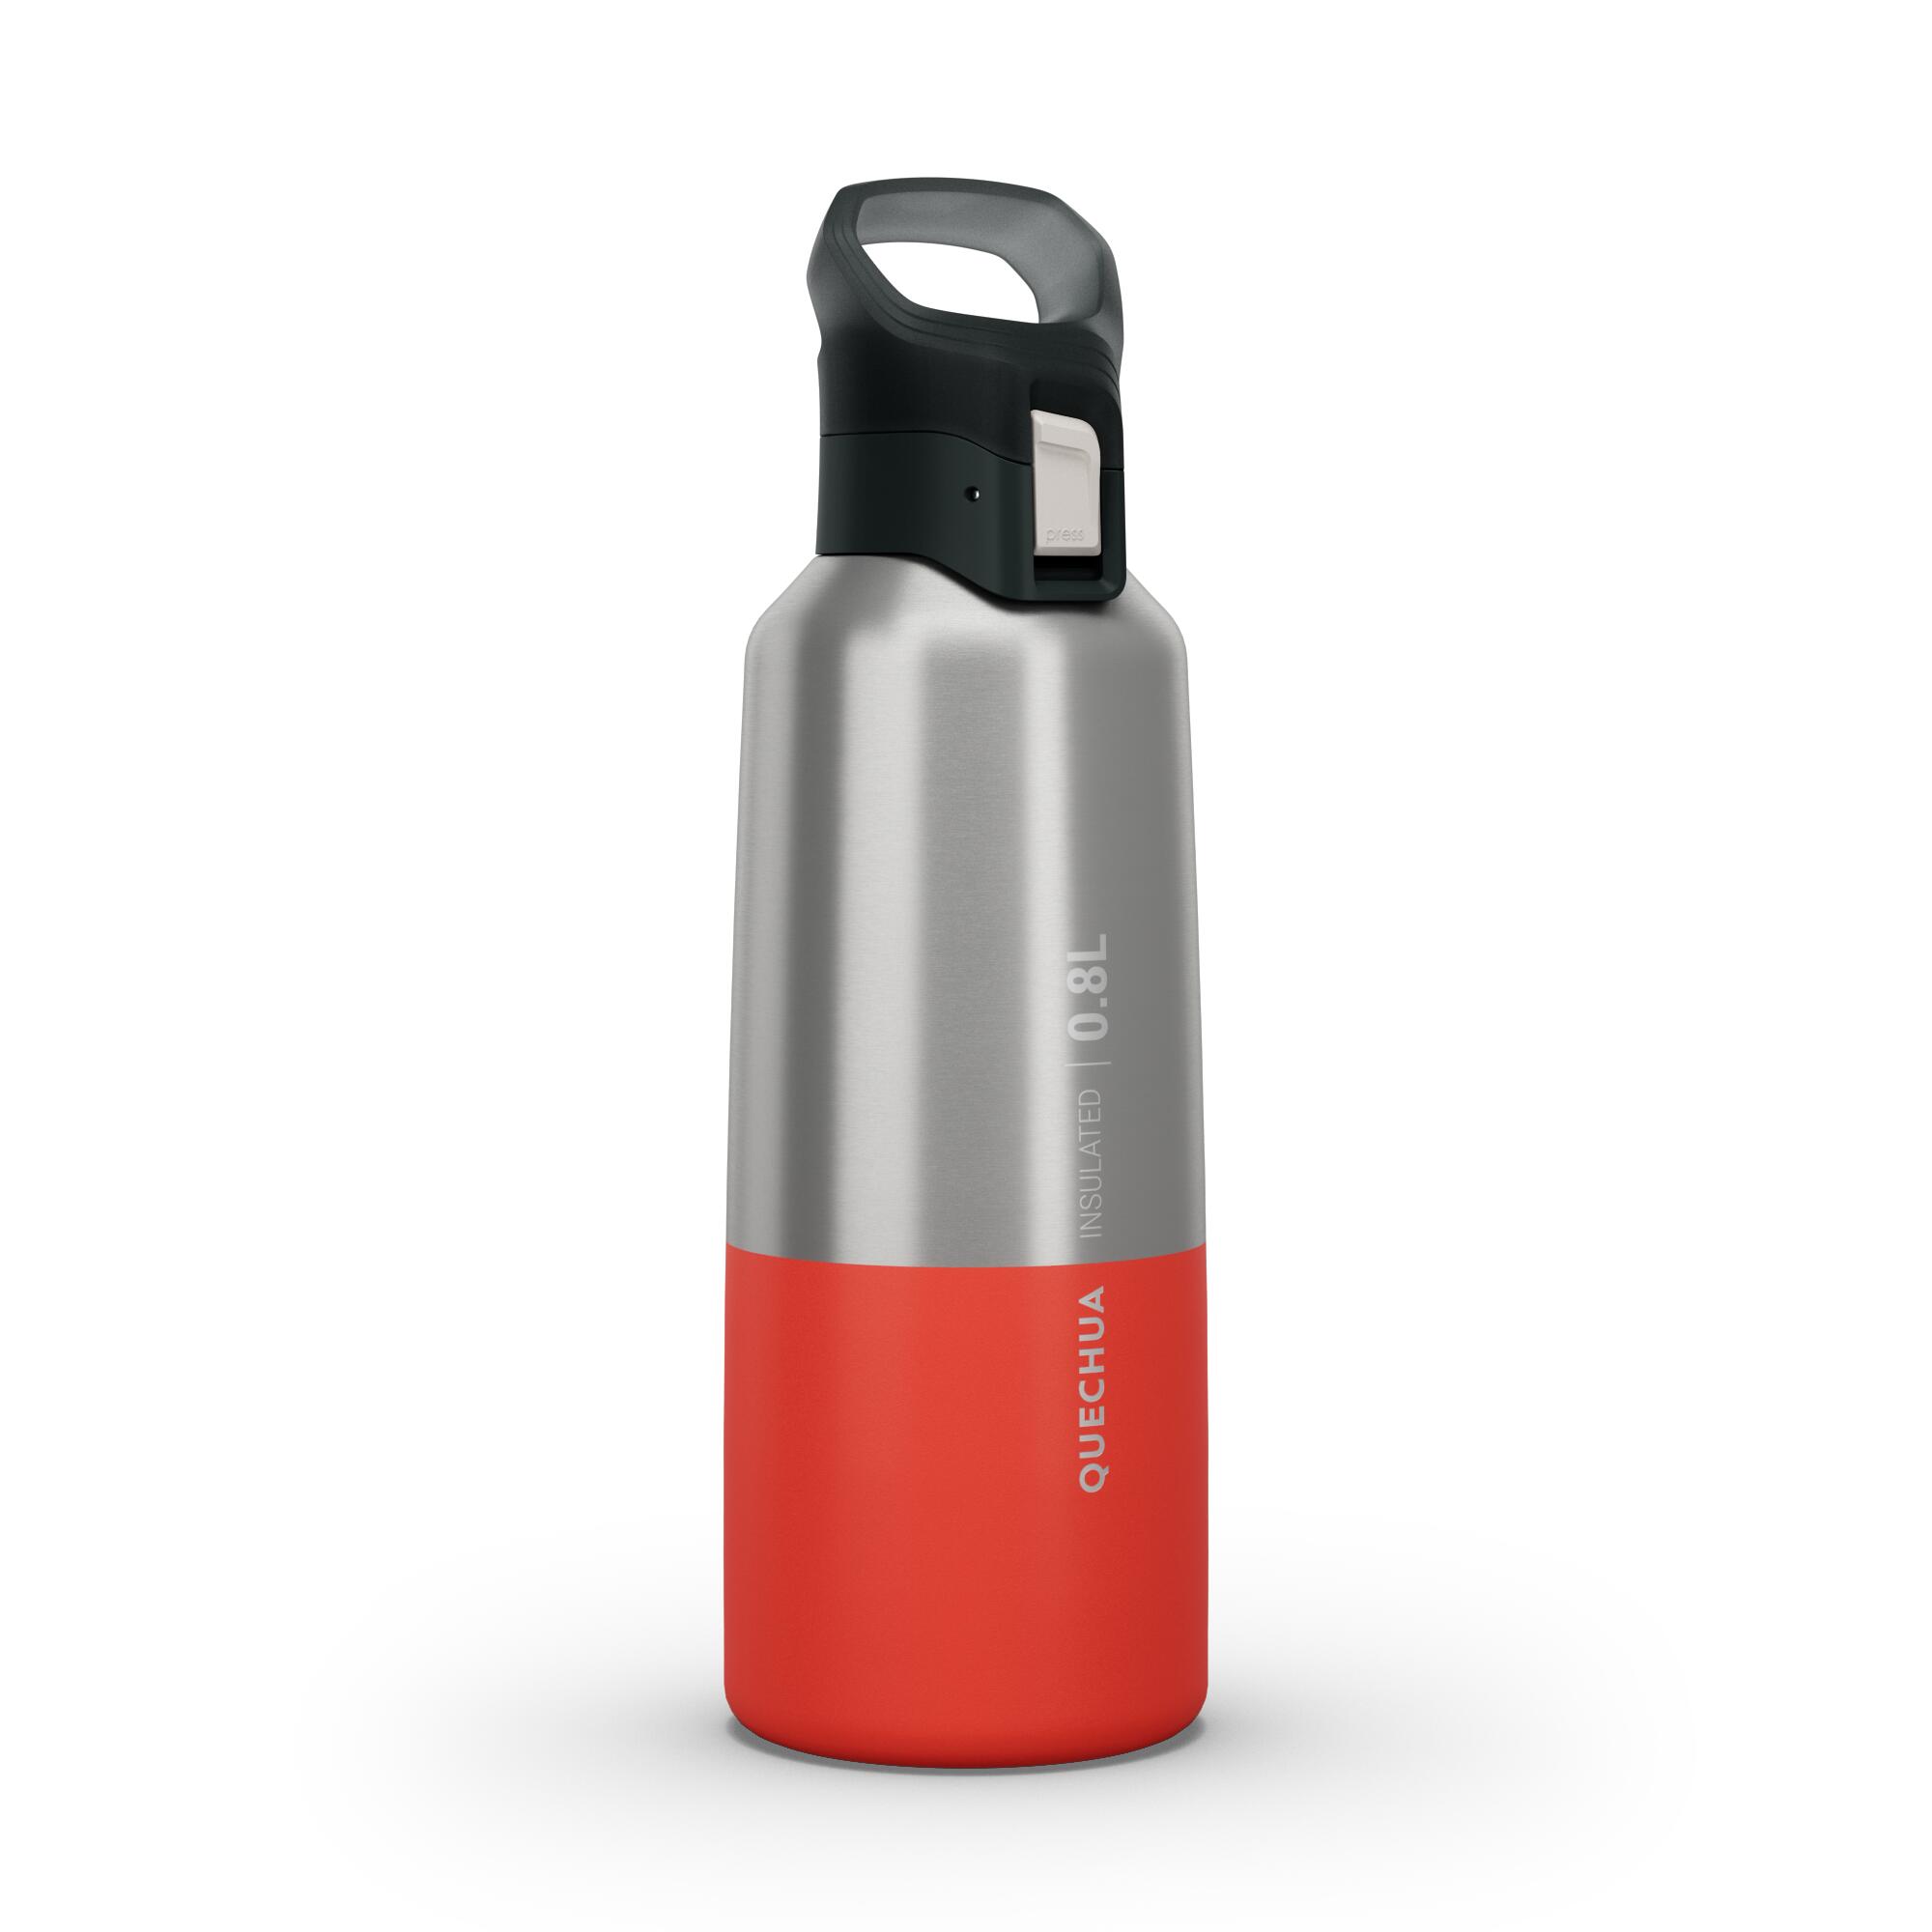 0.8 L stainless steel water bottle with quick-open cap for hiking - Red 19/35